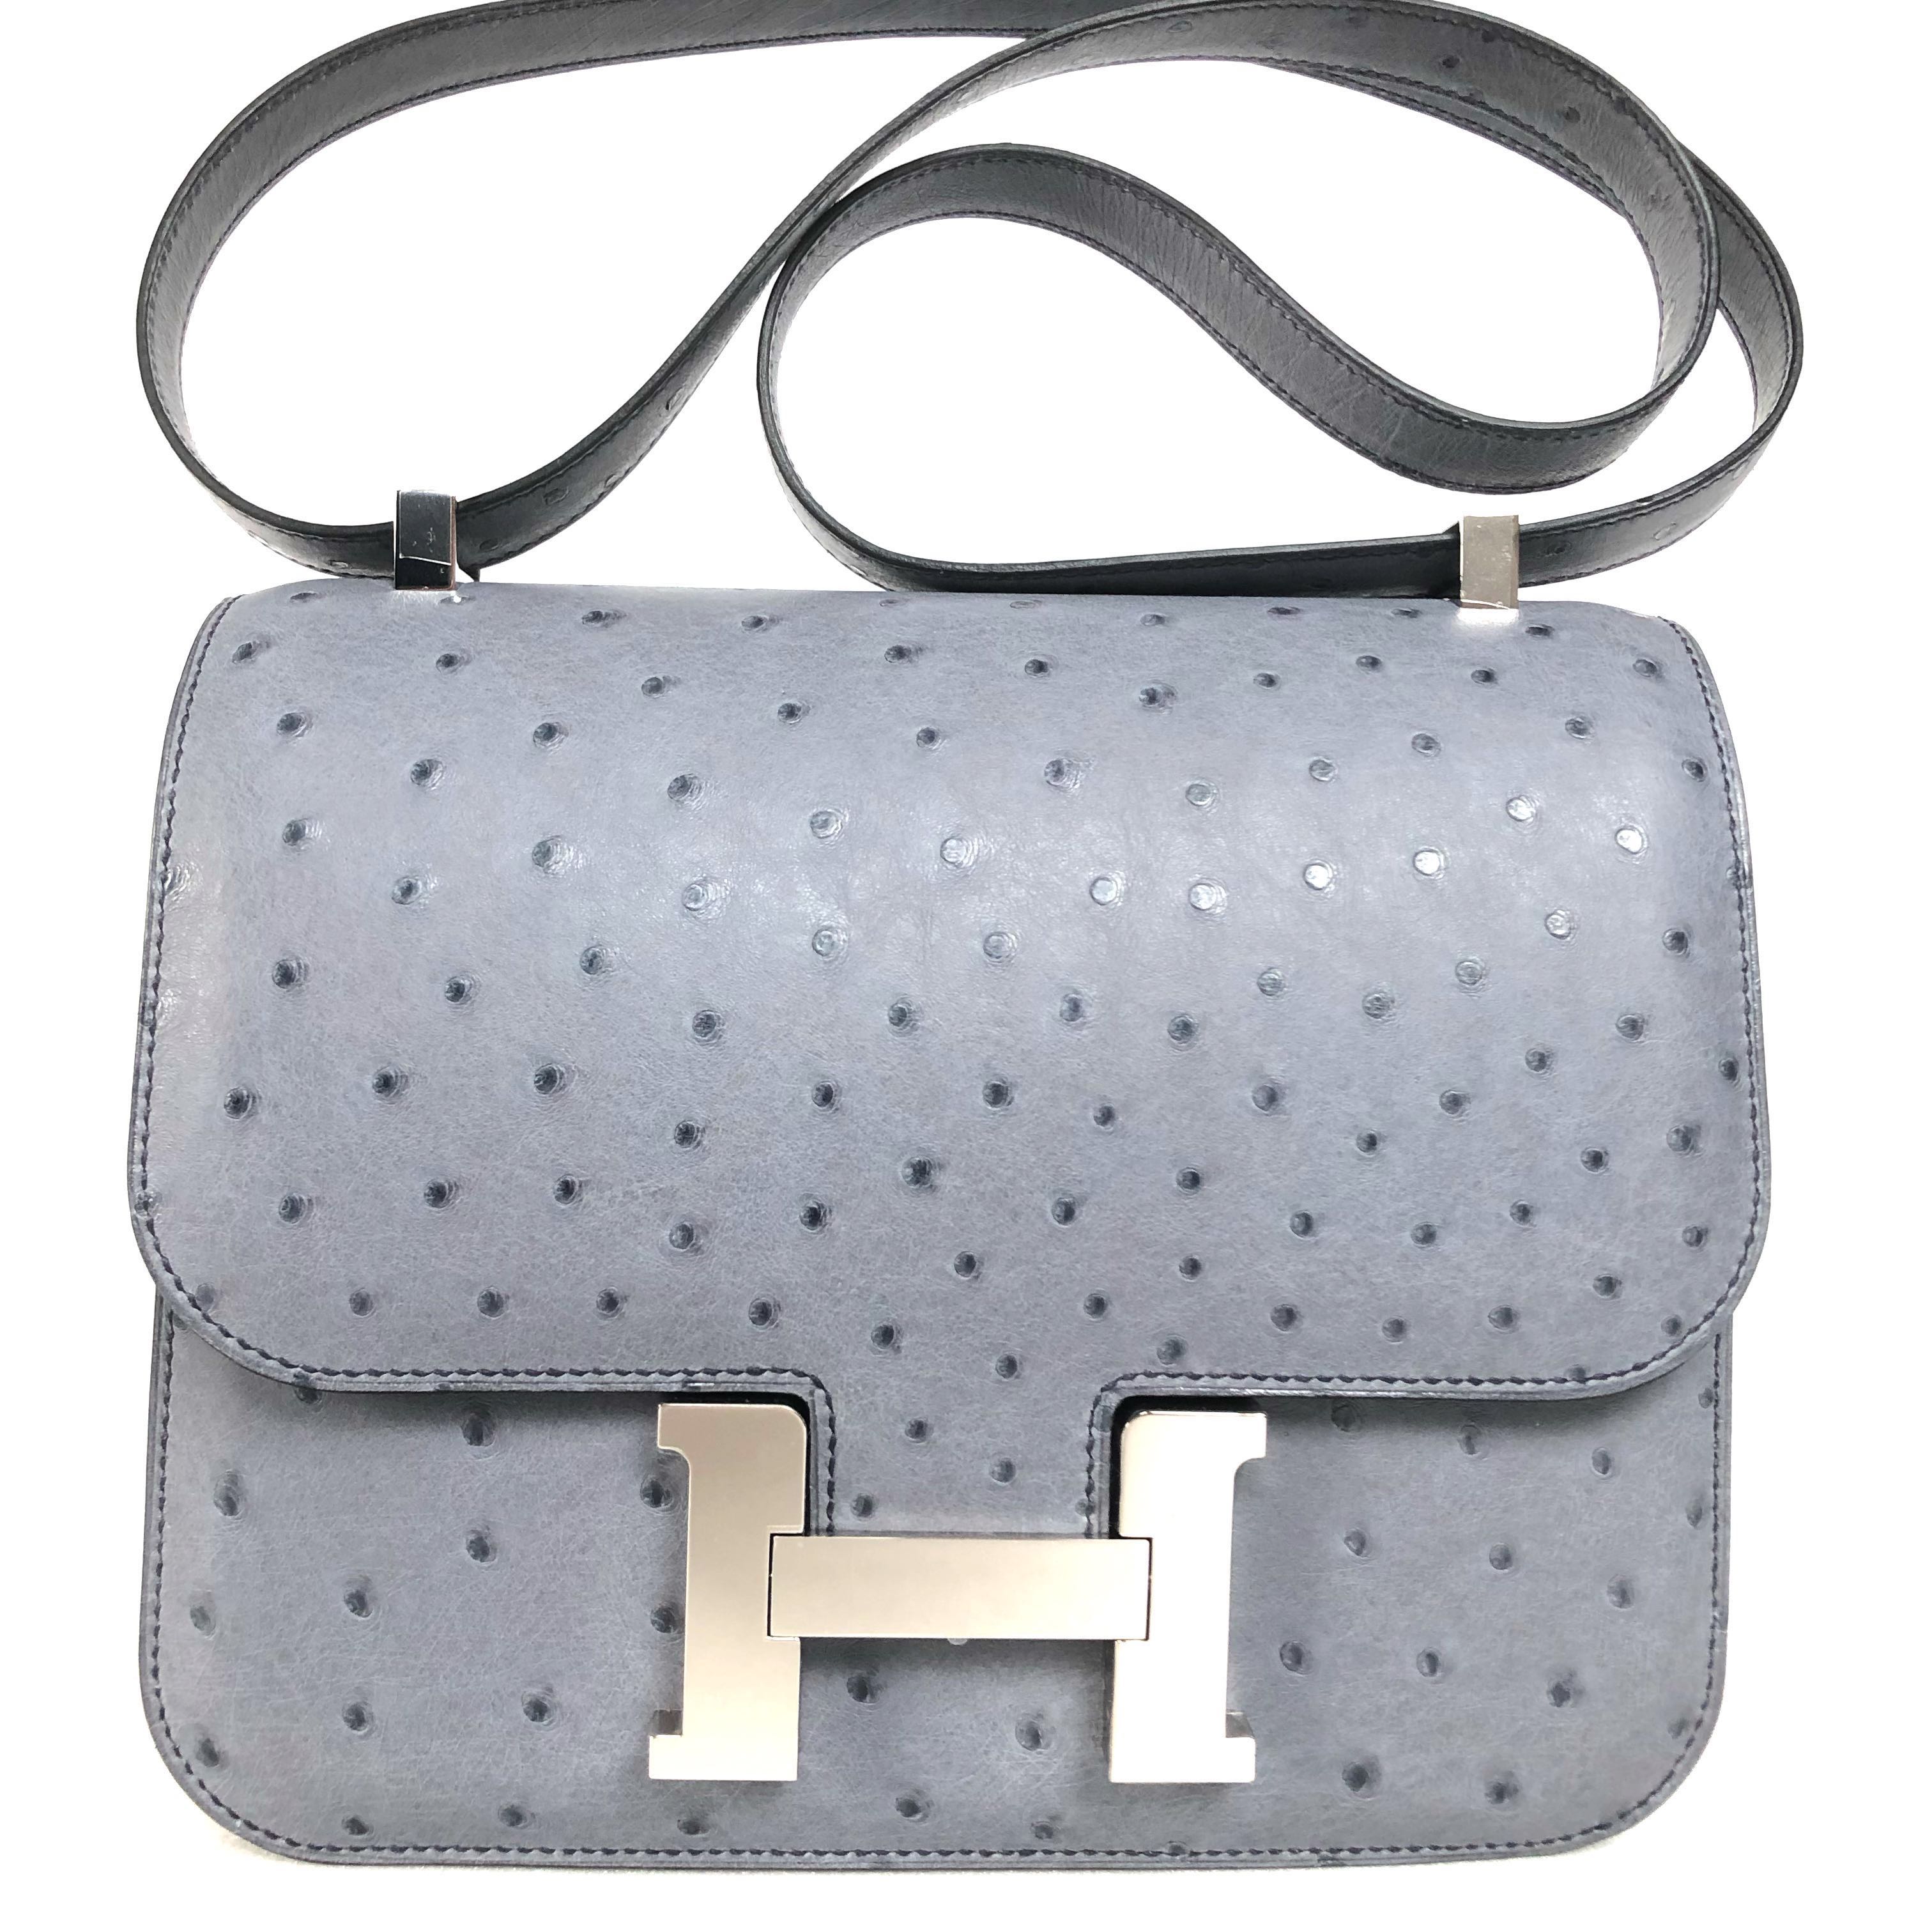 hermes constance ostrich price